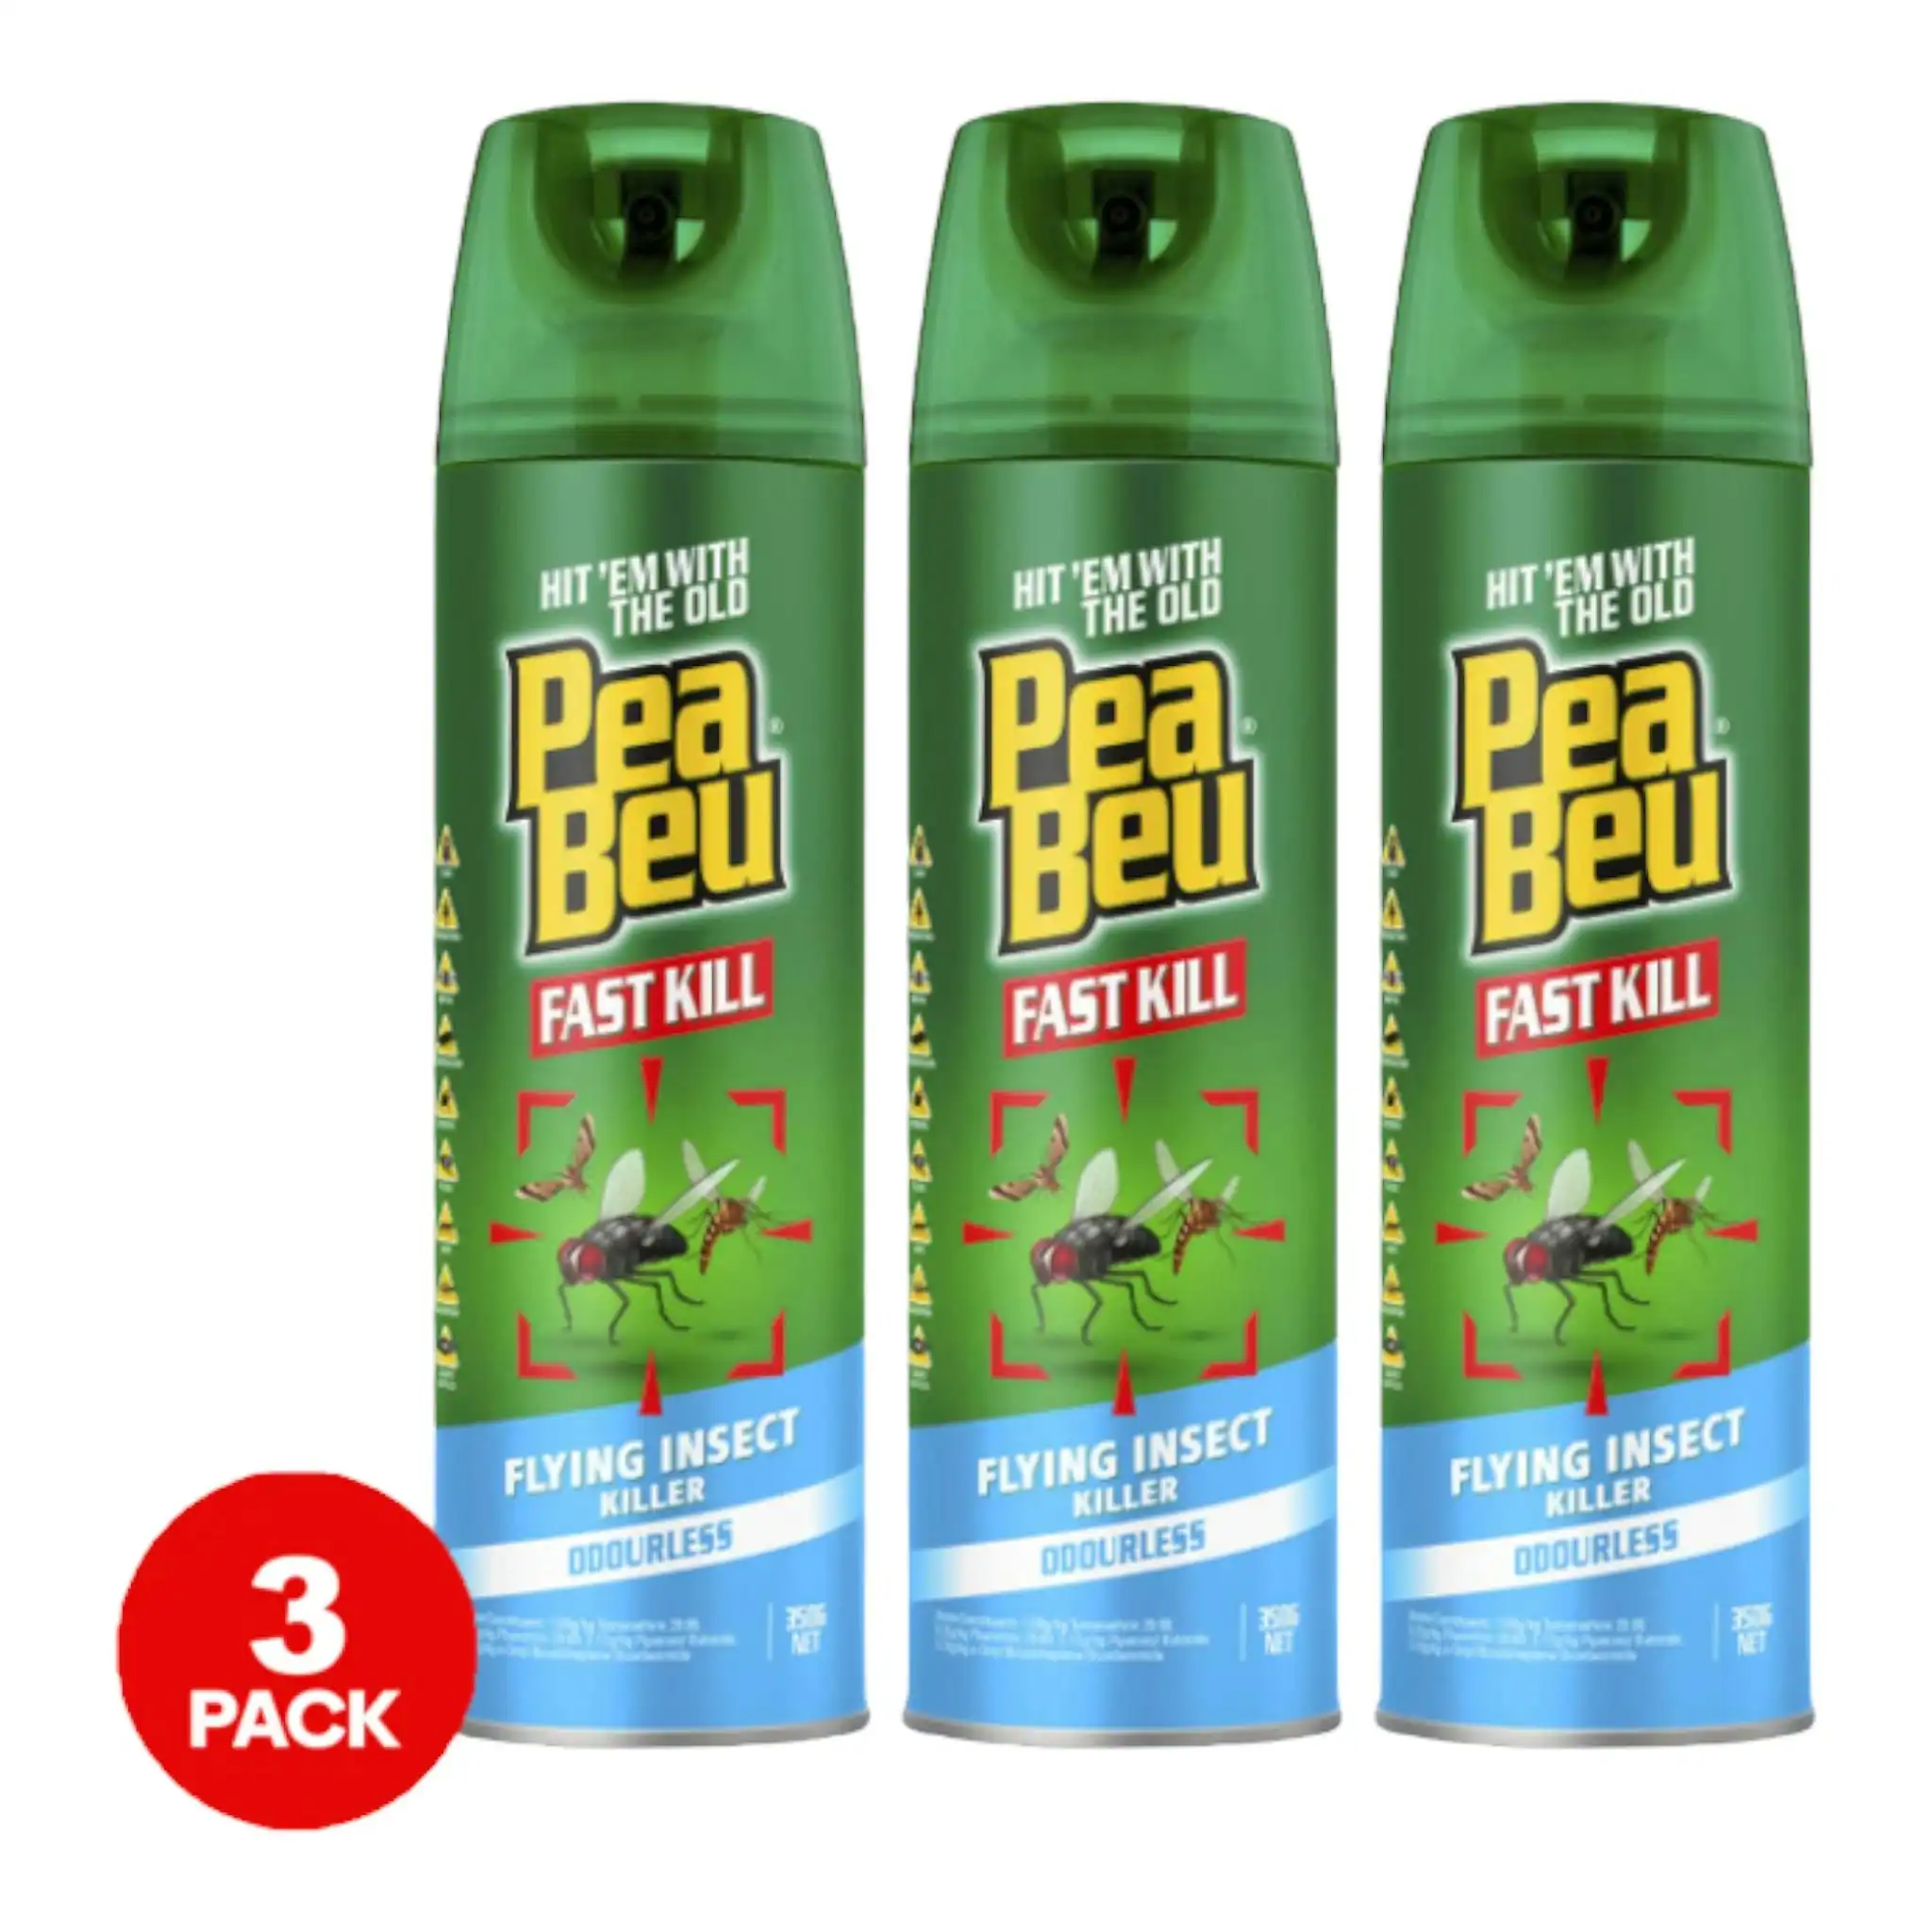 3 Pack Pea Beu Insect Killer Odourless 350g